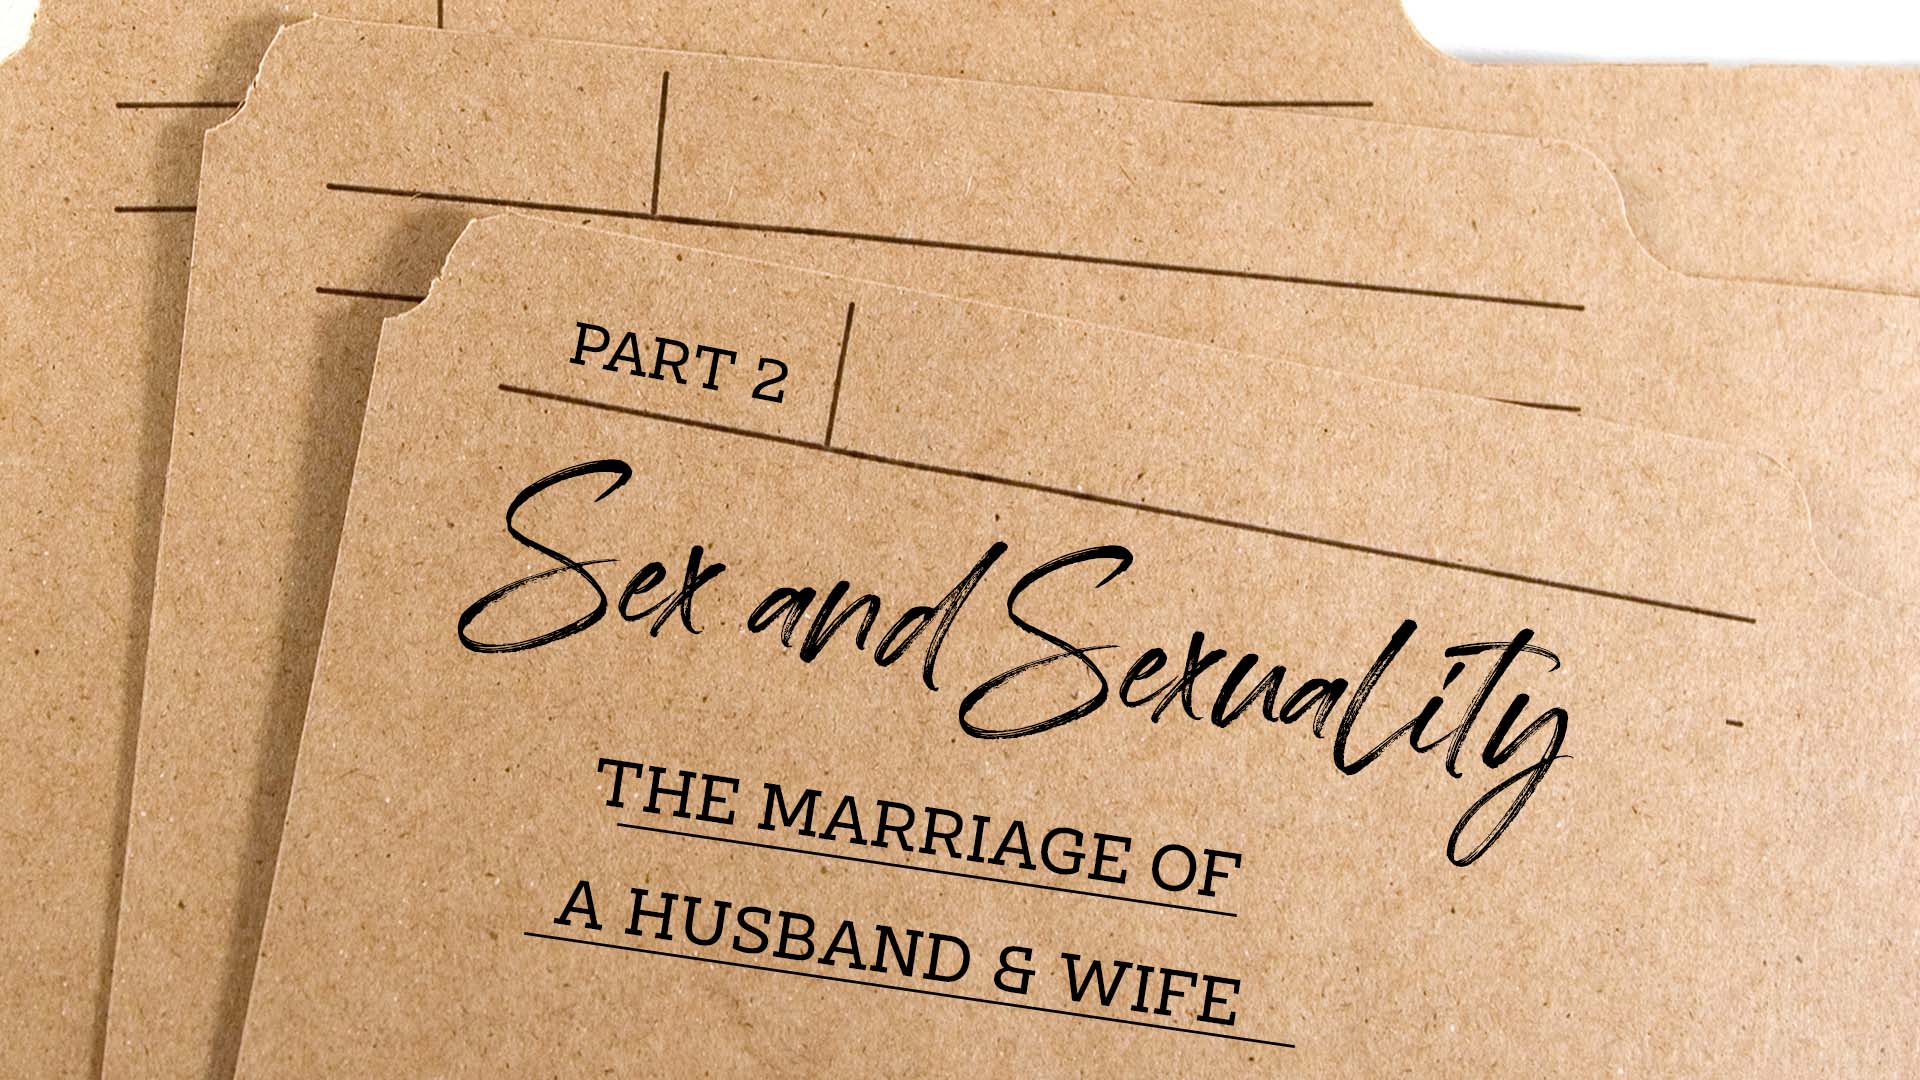 The Marriage Of A Husband And A Wife – Part 2